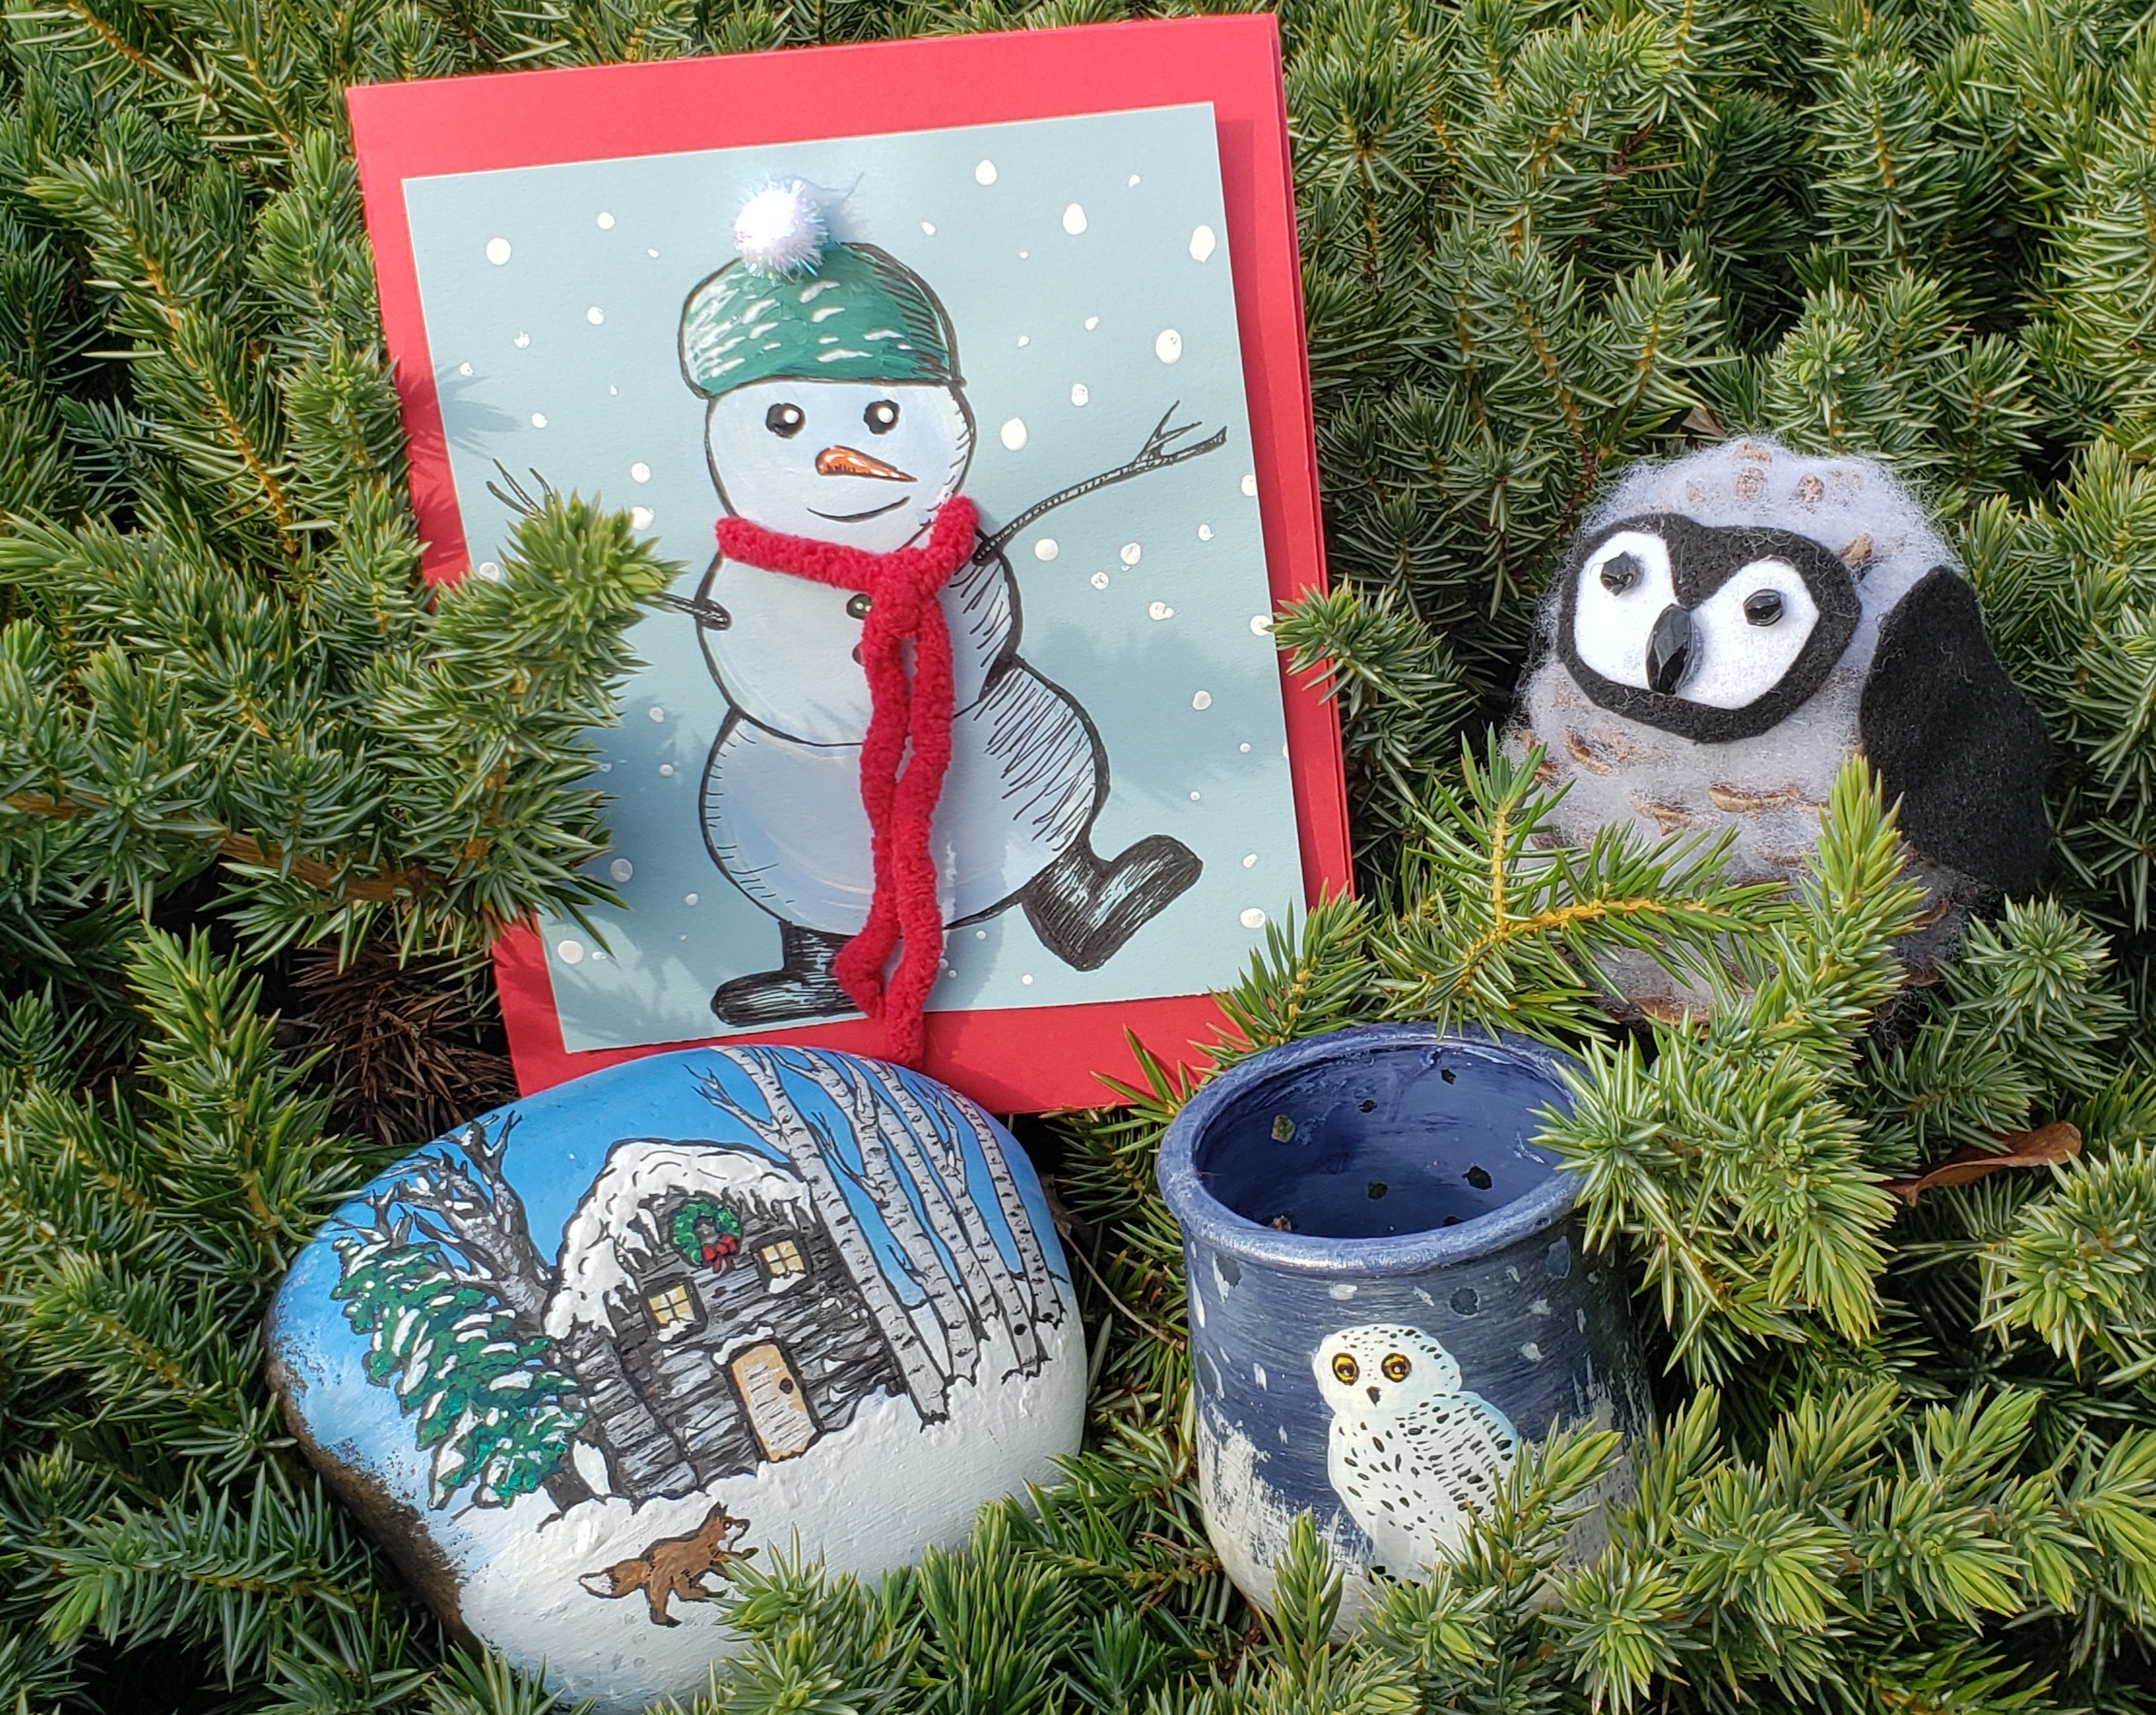 a snowman card, a jar painted with a snowy owl, a rock painted with a winter scene and a pinecone penguin